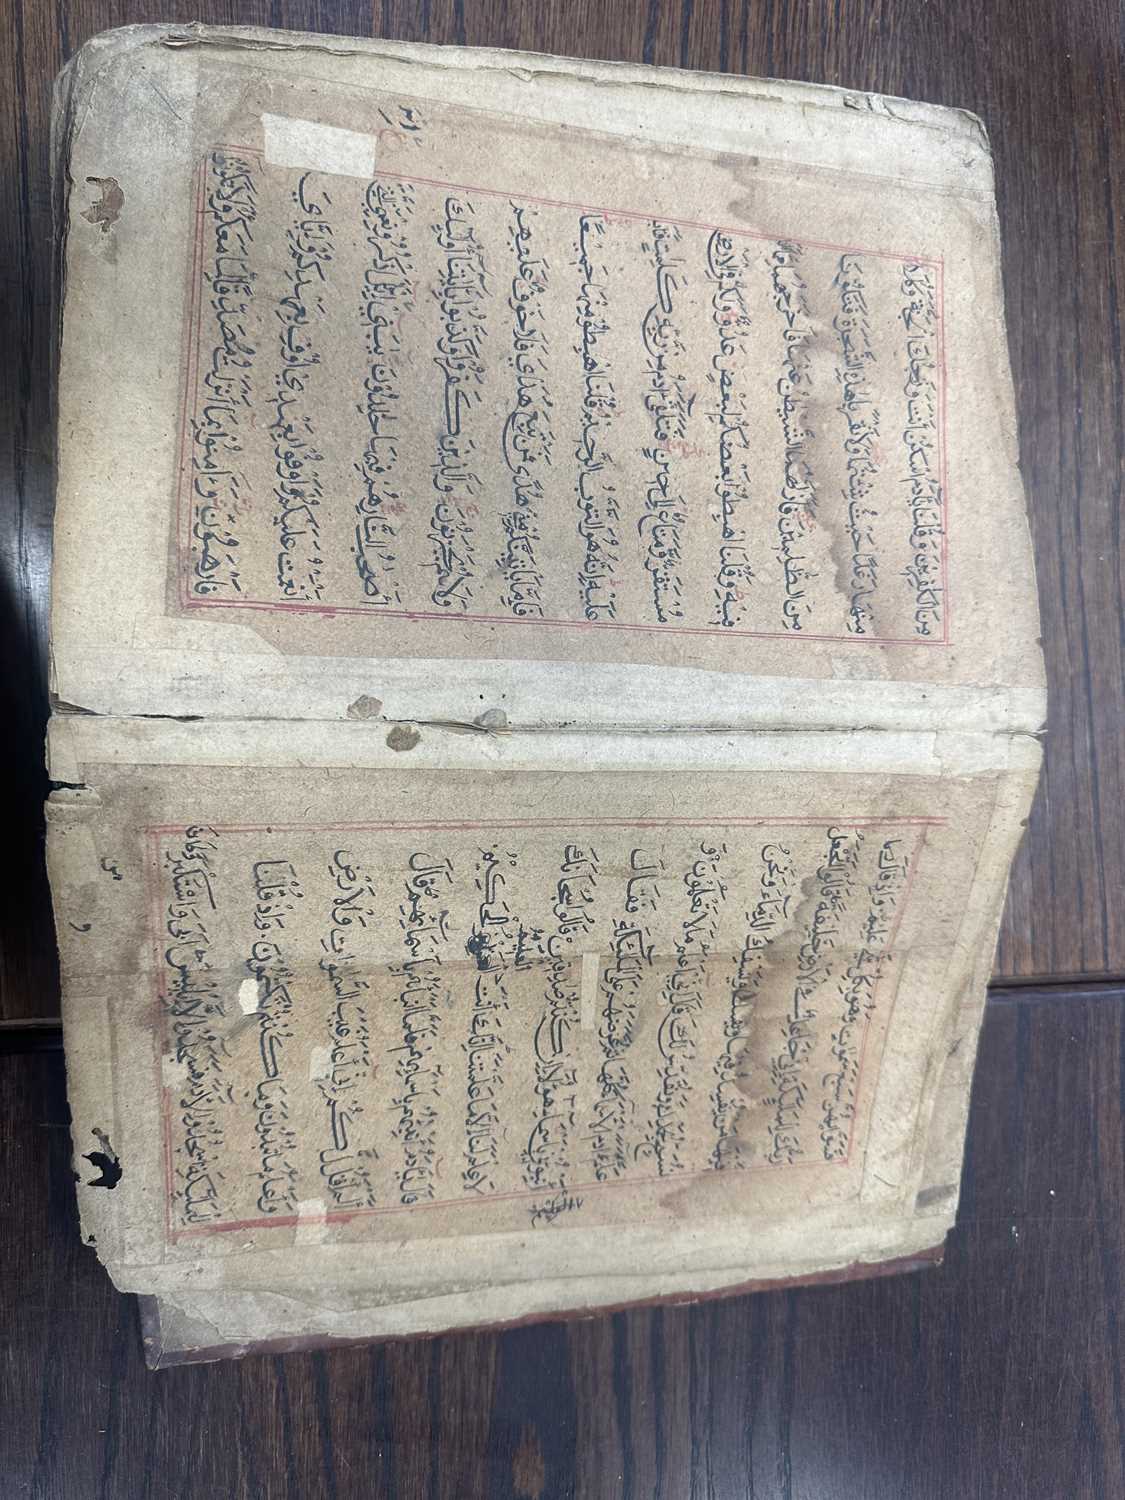 AN EARLY COPY OF THE KORAN LEATHER BOUND BOOK - Image 22 of 44